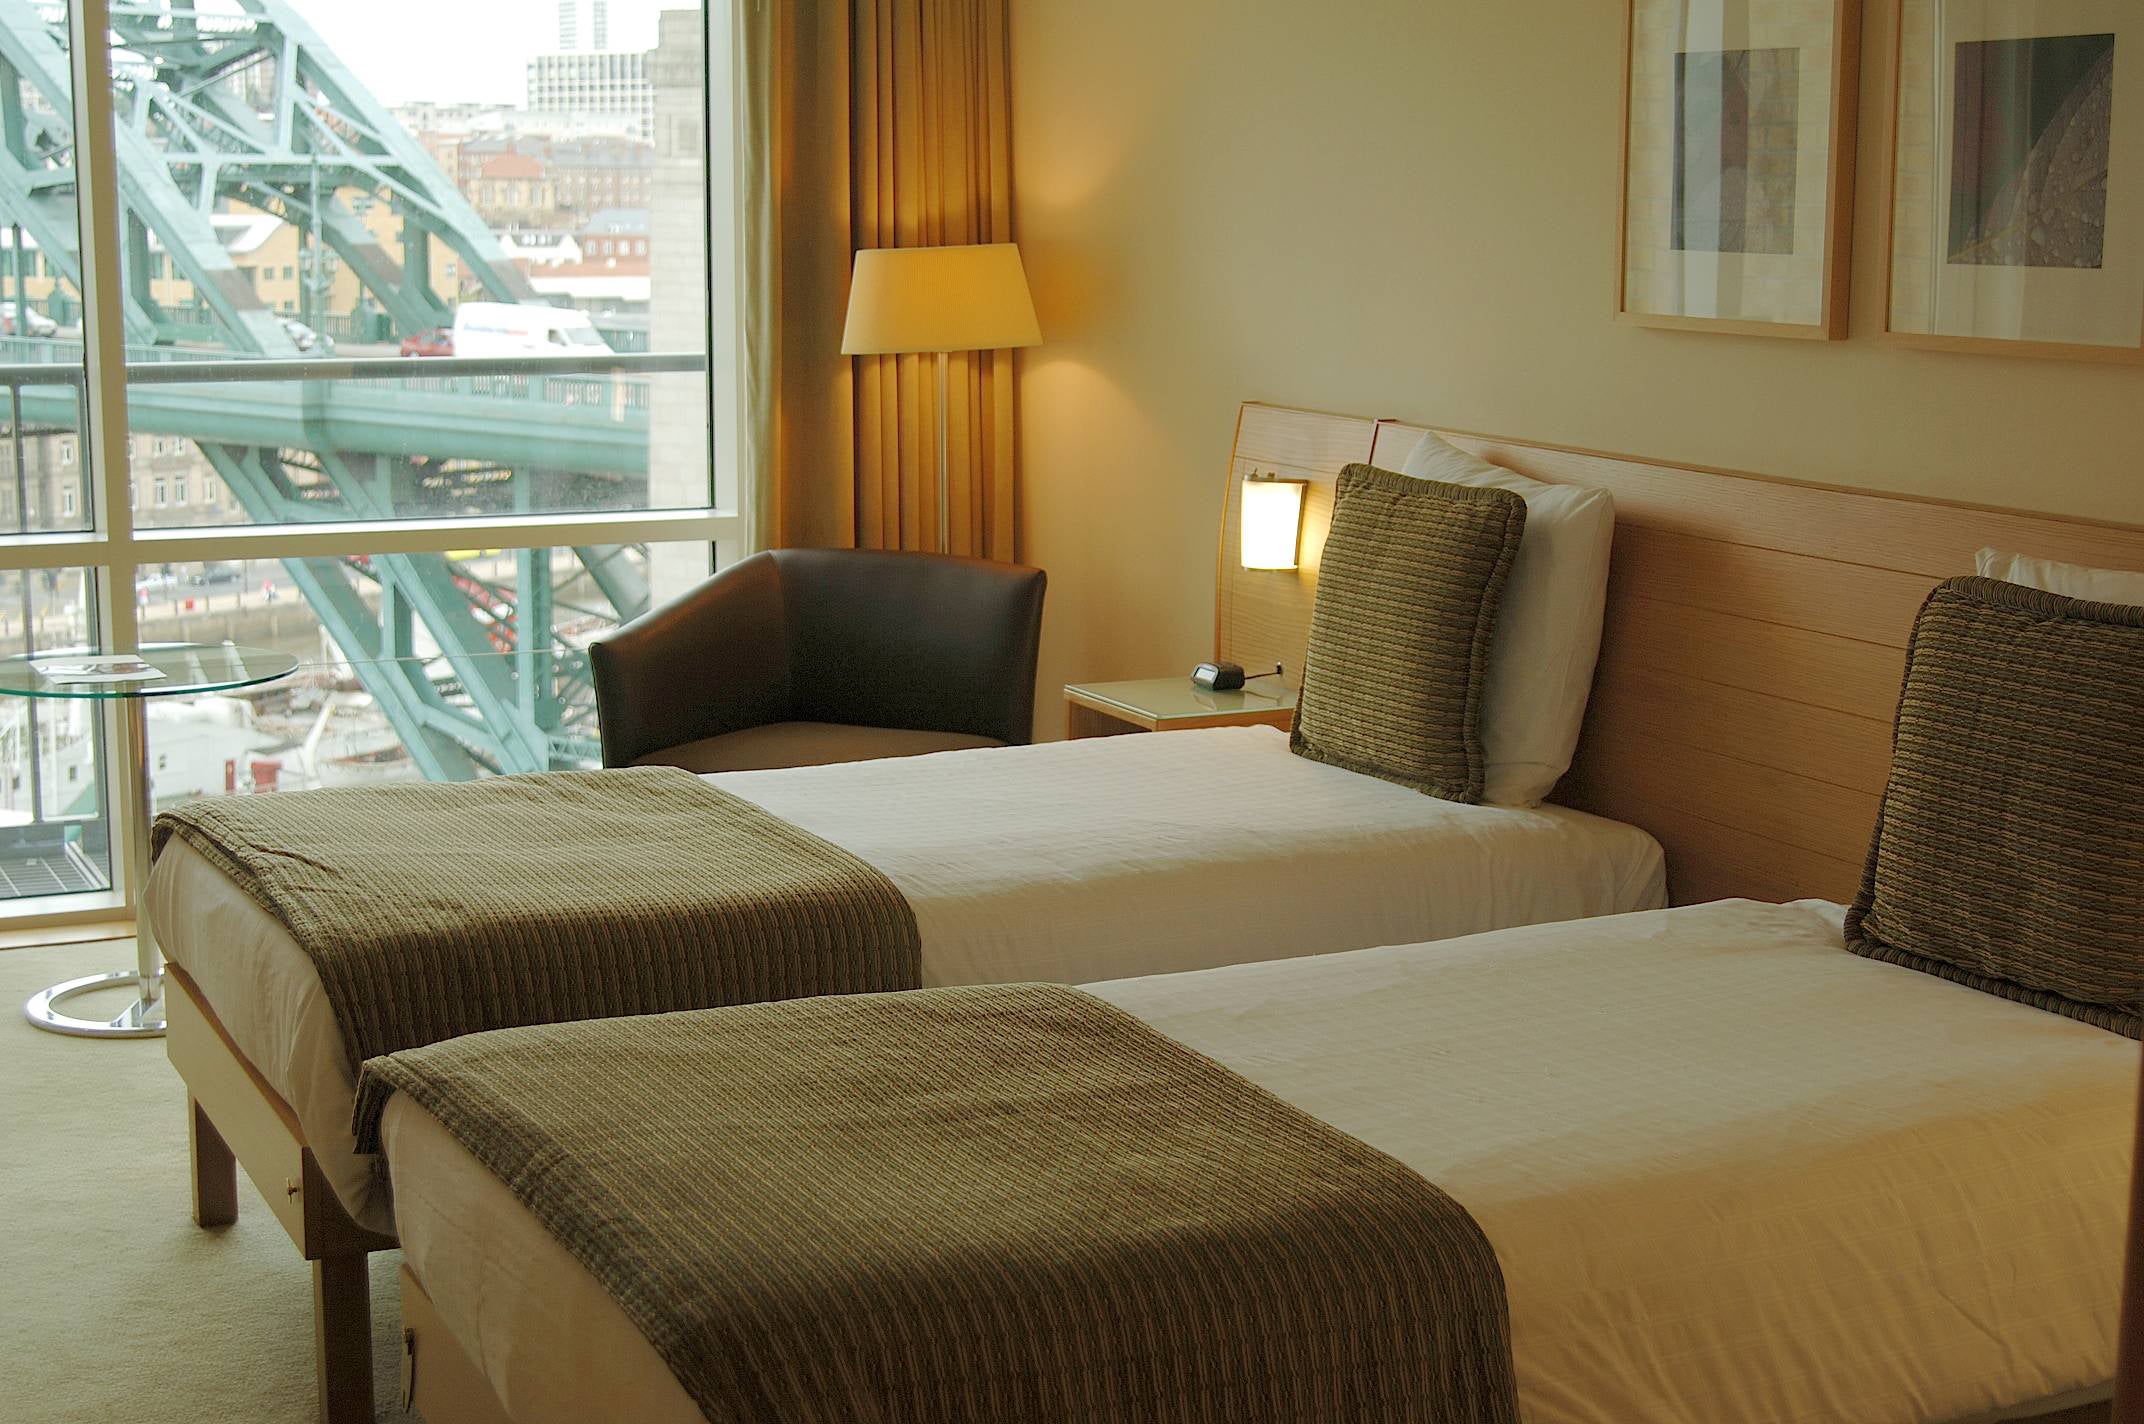 The Hilton’s middle fourth or fifth floors offer ample opportunities for bridge-watching (H